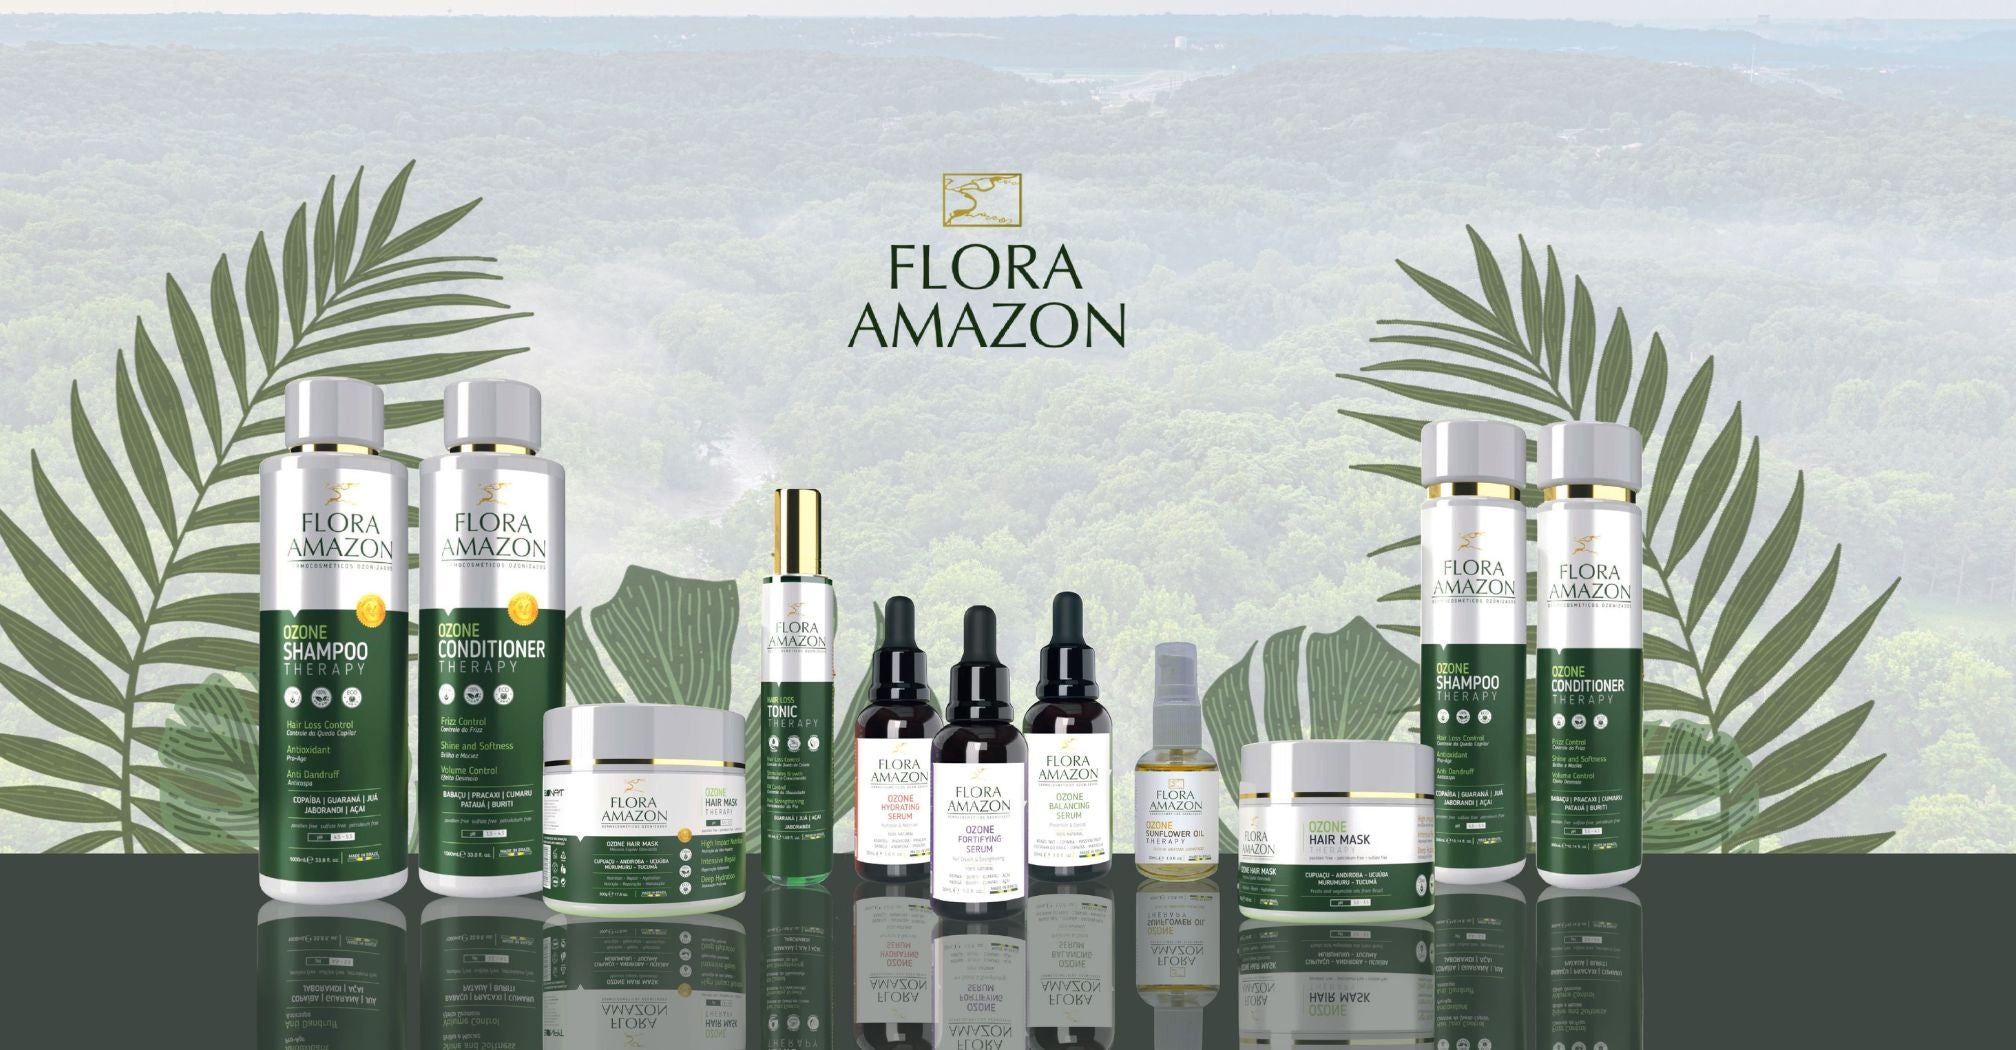 full collection of ozone skin and hair products by flora amazon, from shampoo to botanical oils.